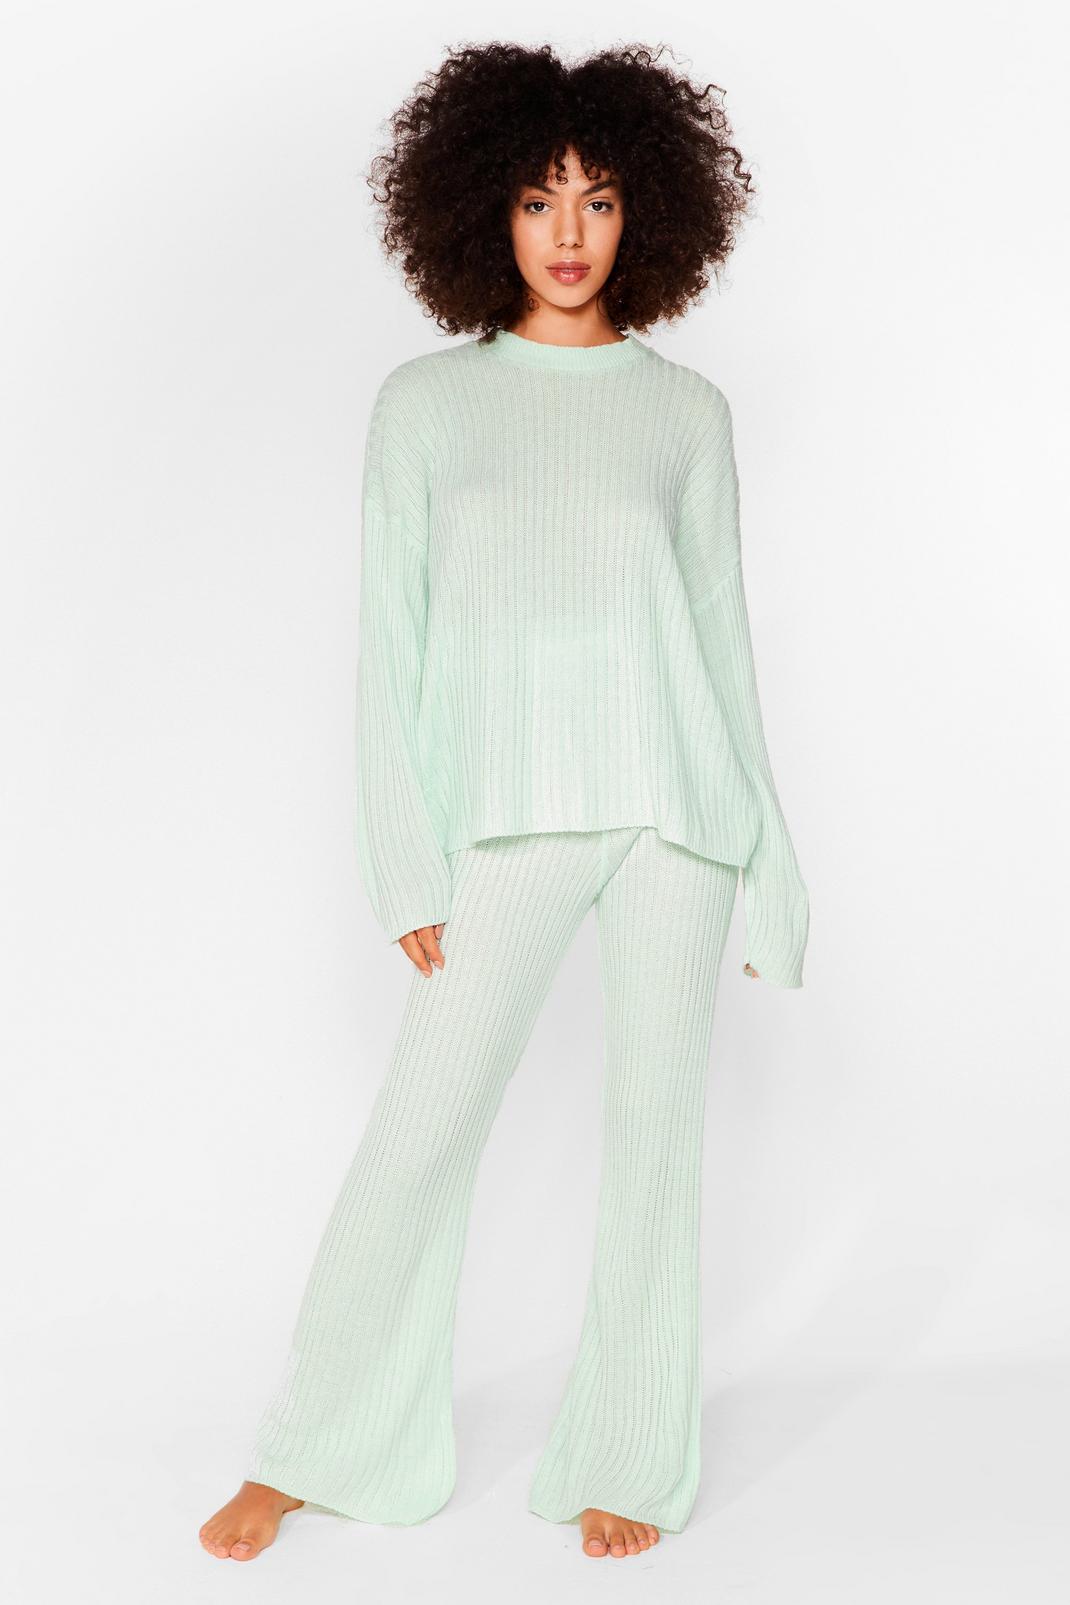 Mint Another Bright Idea Knit Jumper and Pants Set image number 1